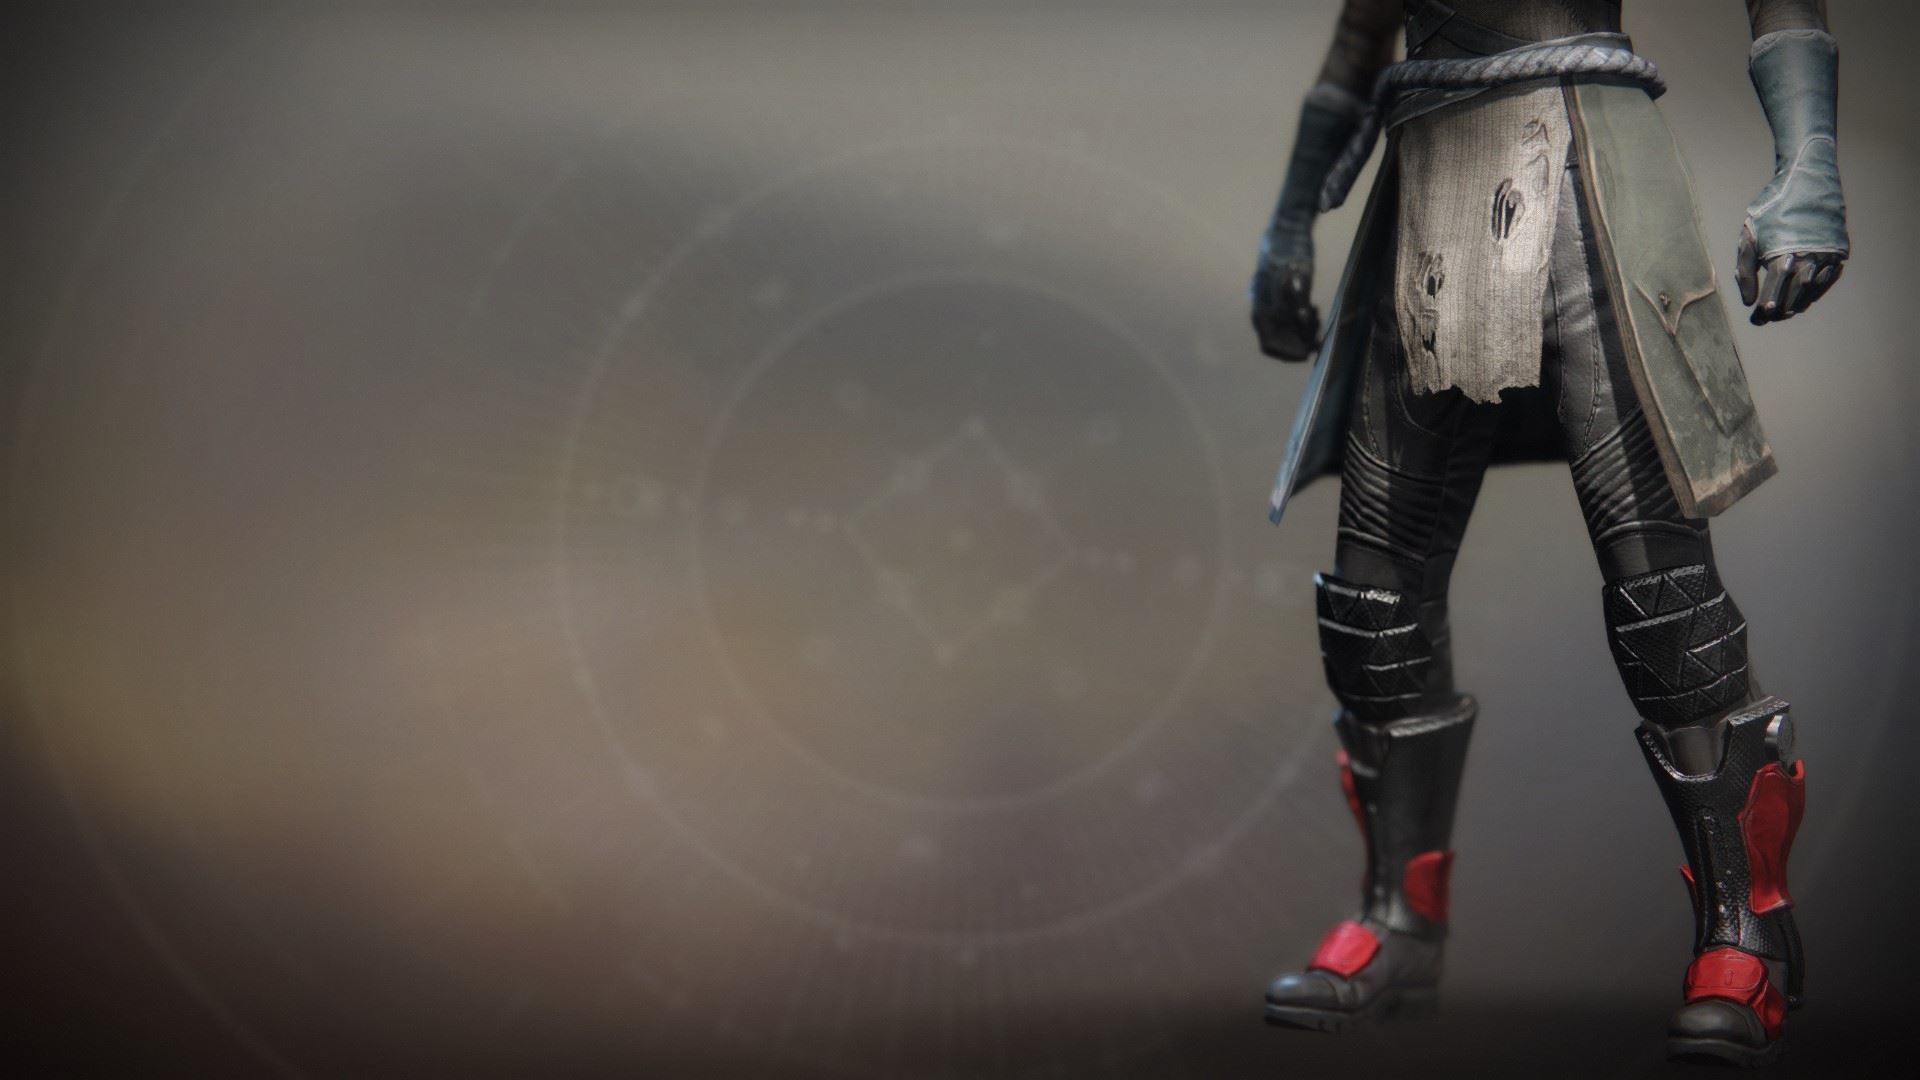 An in-game render of the Gunsmith's Devotion Boots.